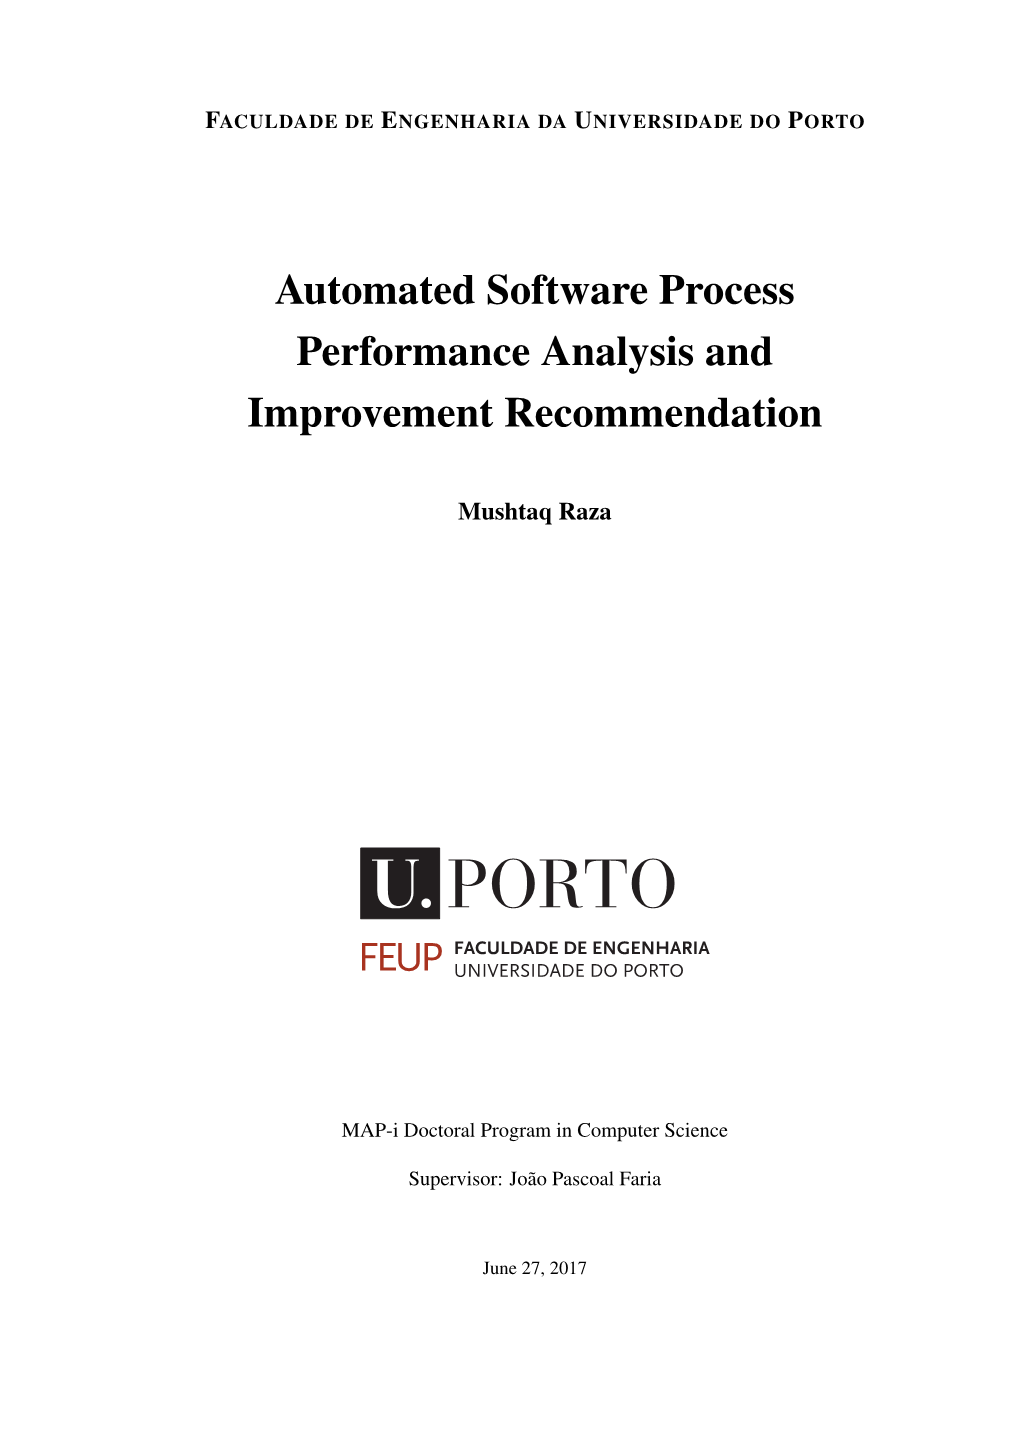 Automated Software Process Performance Analysis and Improvement Recommendation